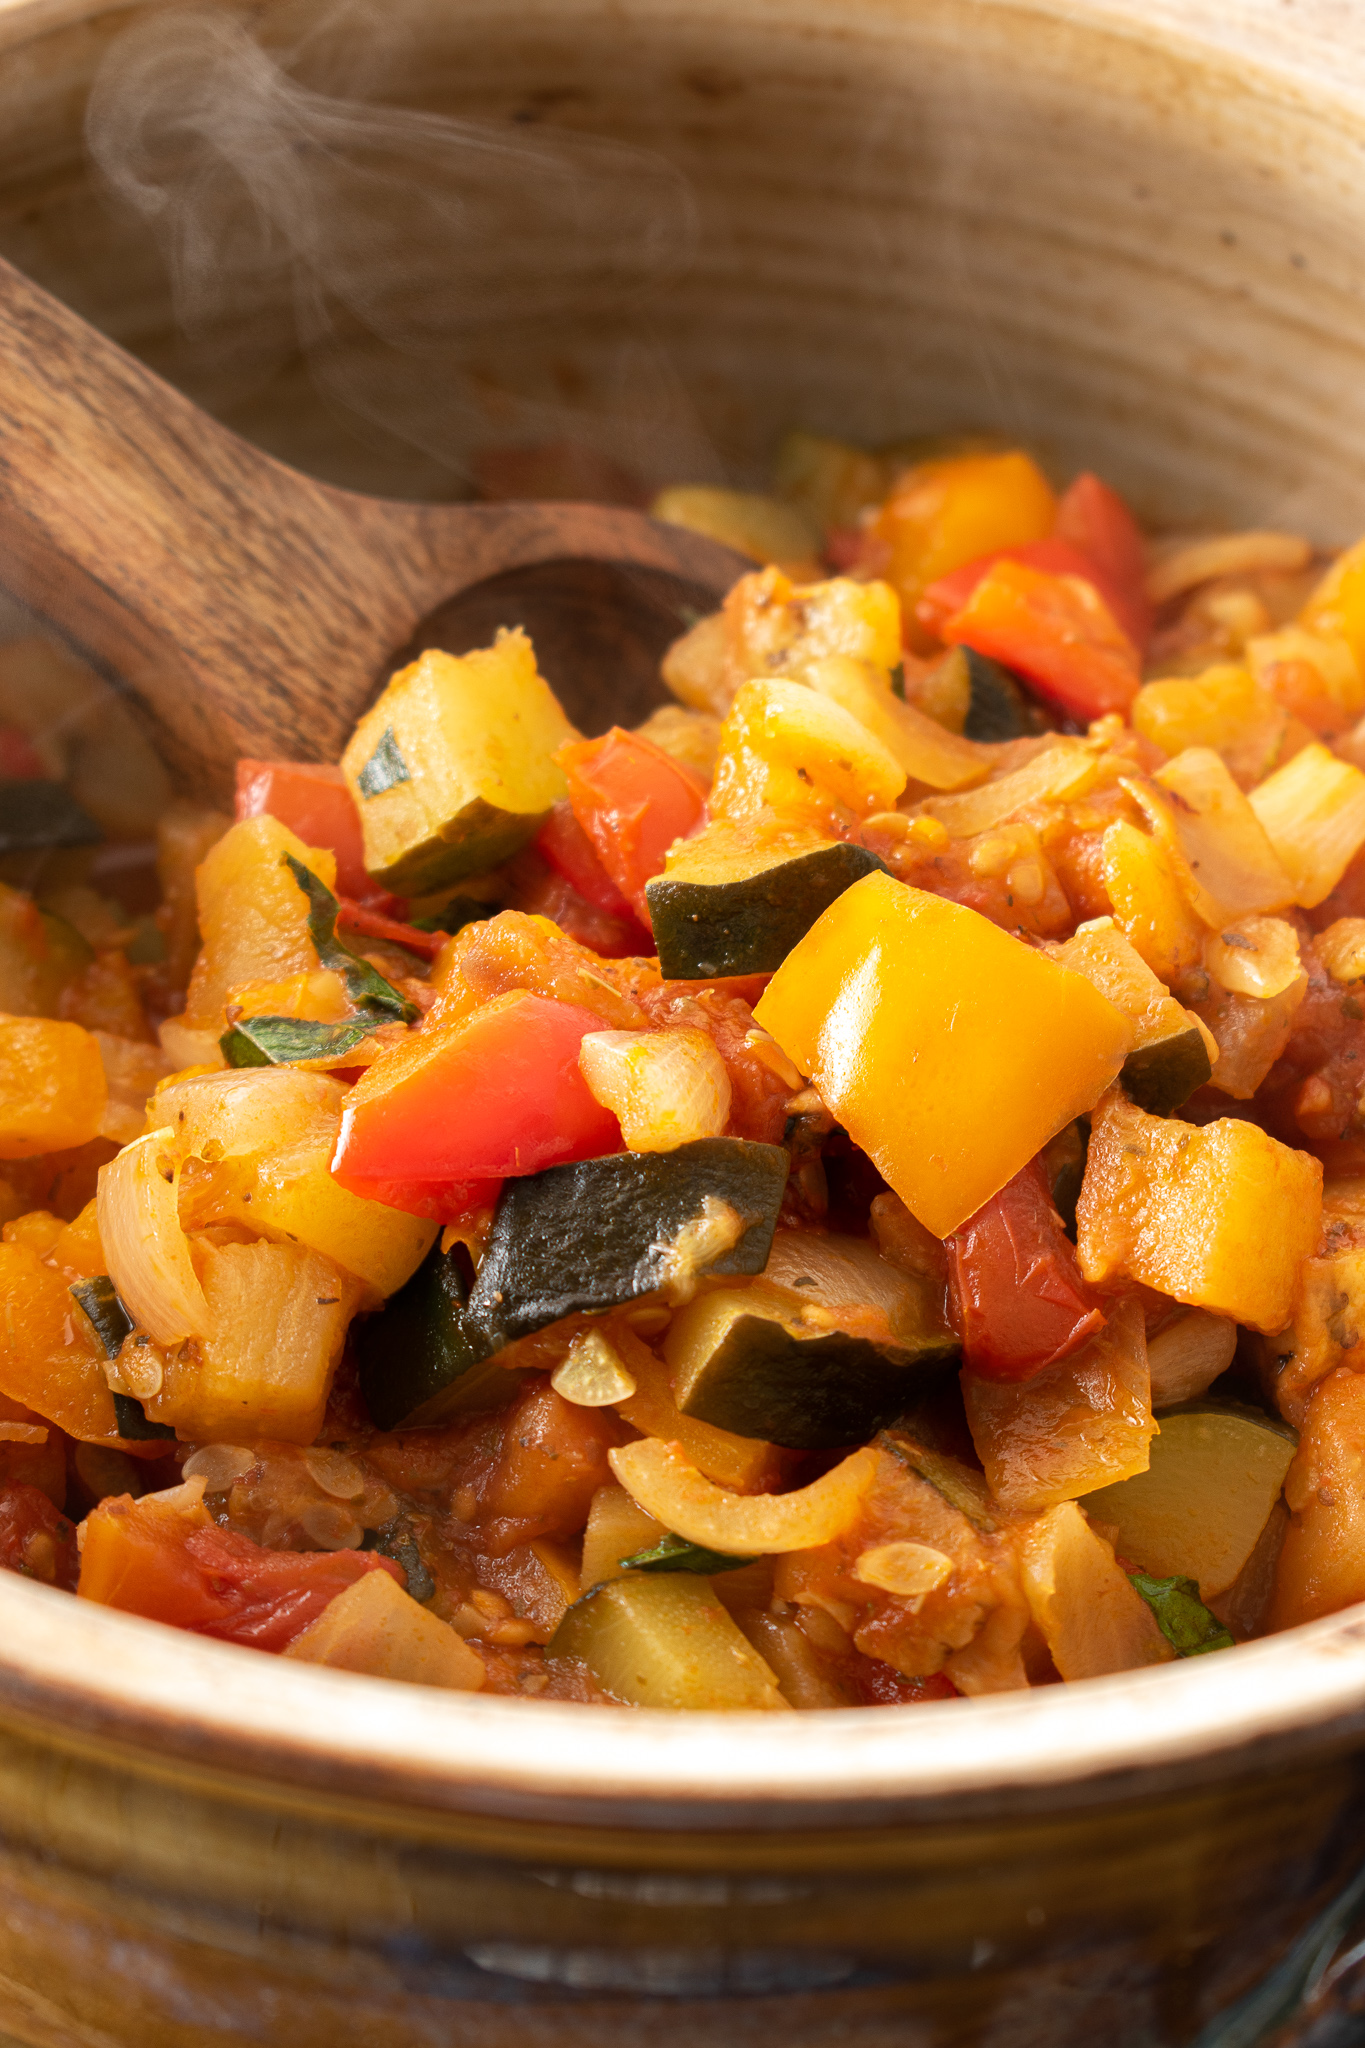 No Fuss Easy Simple Ratatouille Recipe in Clay Pot Dutch Oven - the Home Baked Vegan